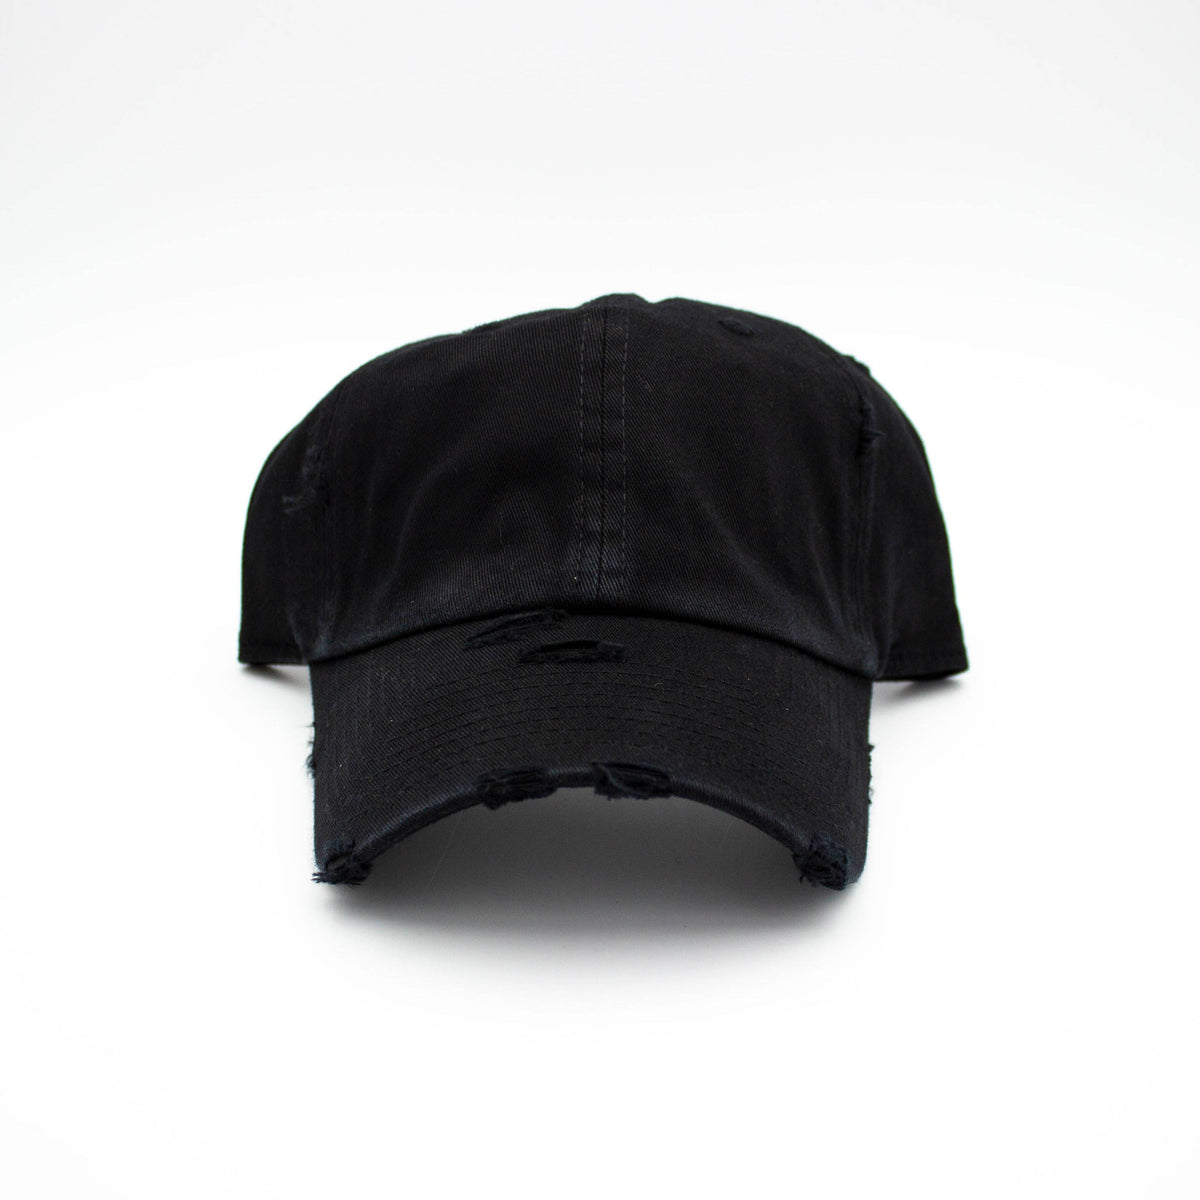 "GA" Embroidered Hat